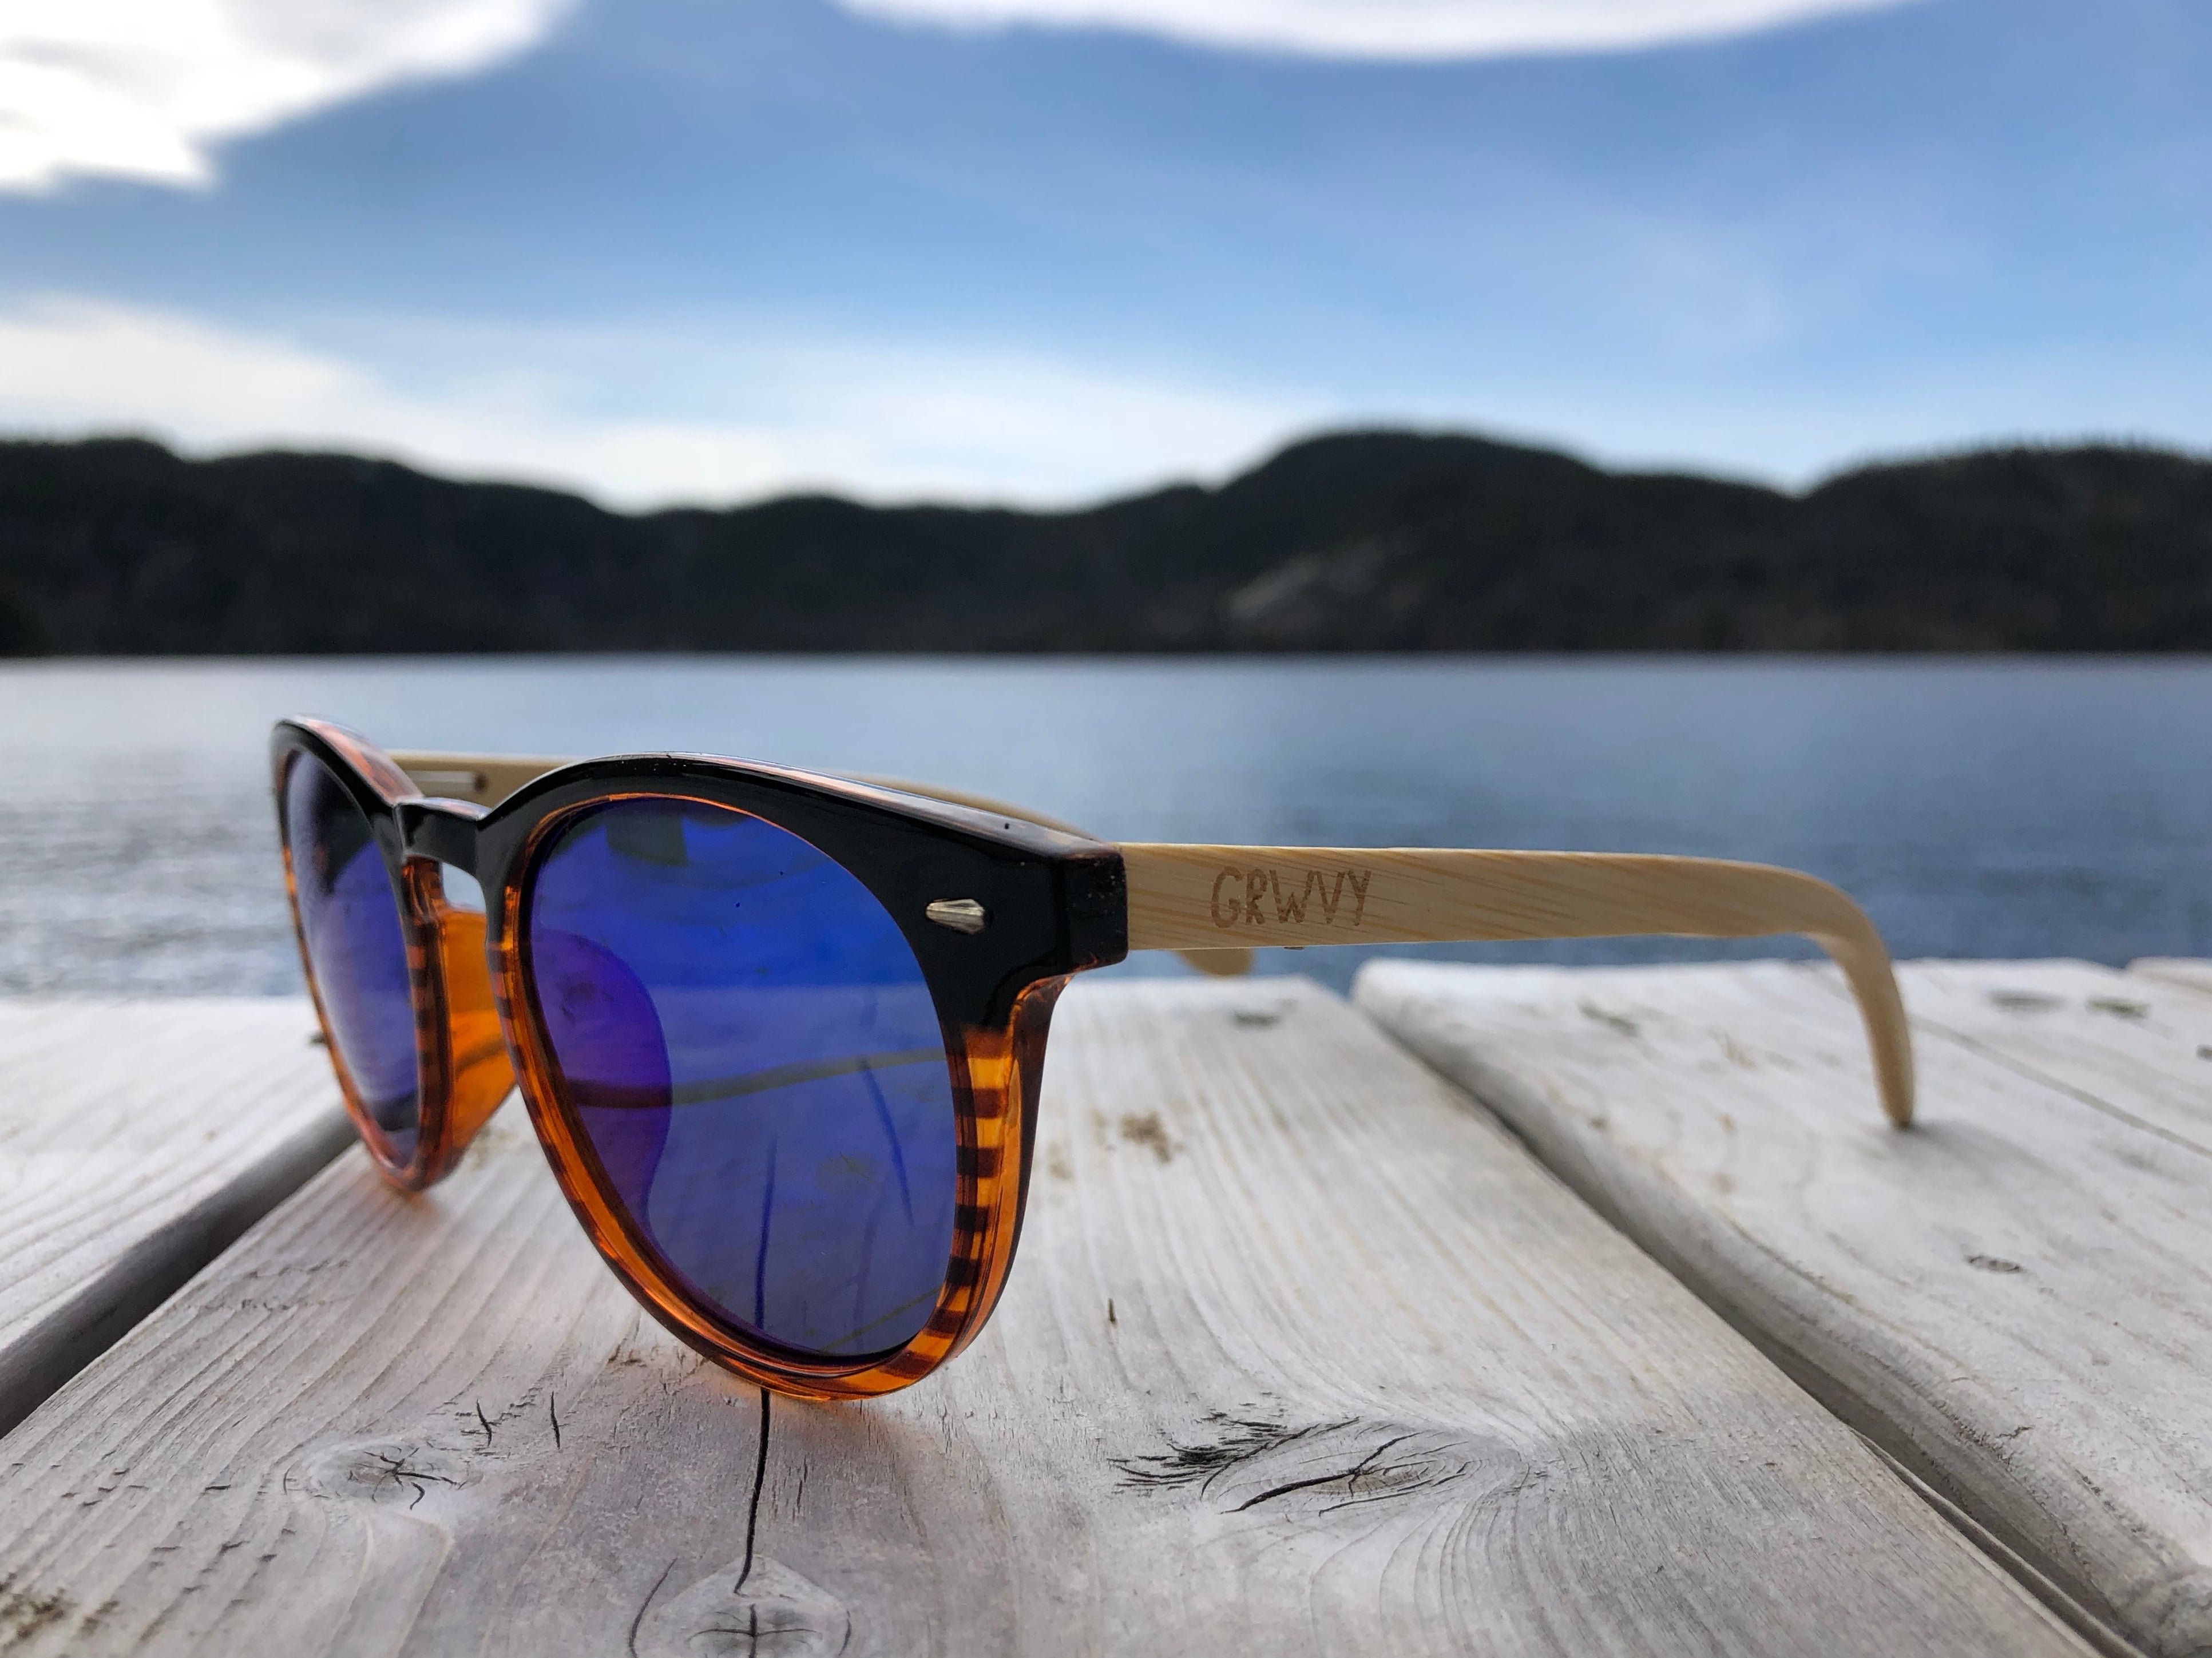 Reef - Bamboo and plastic sunglasses - GRWVY